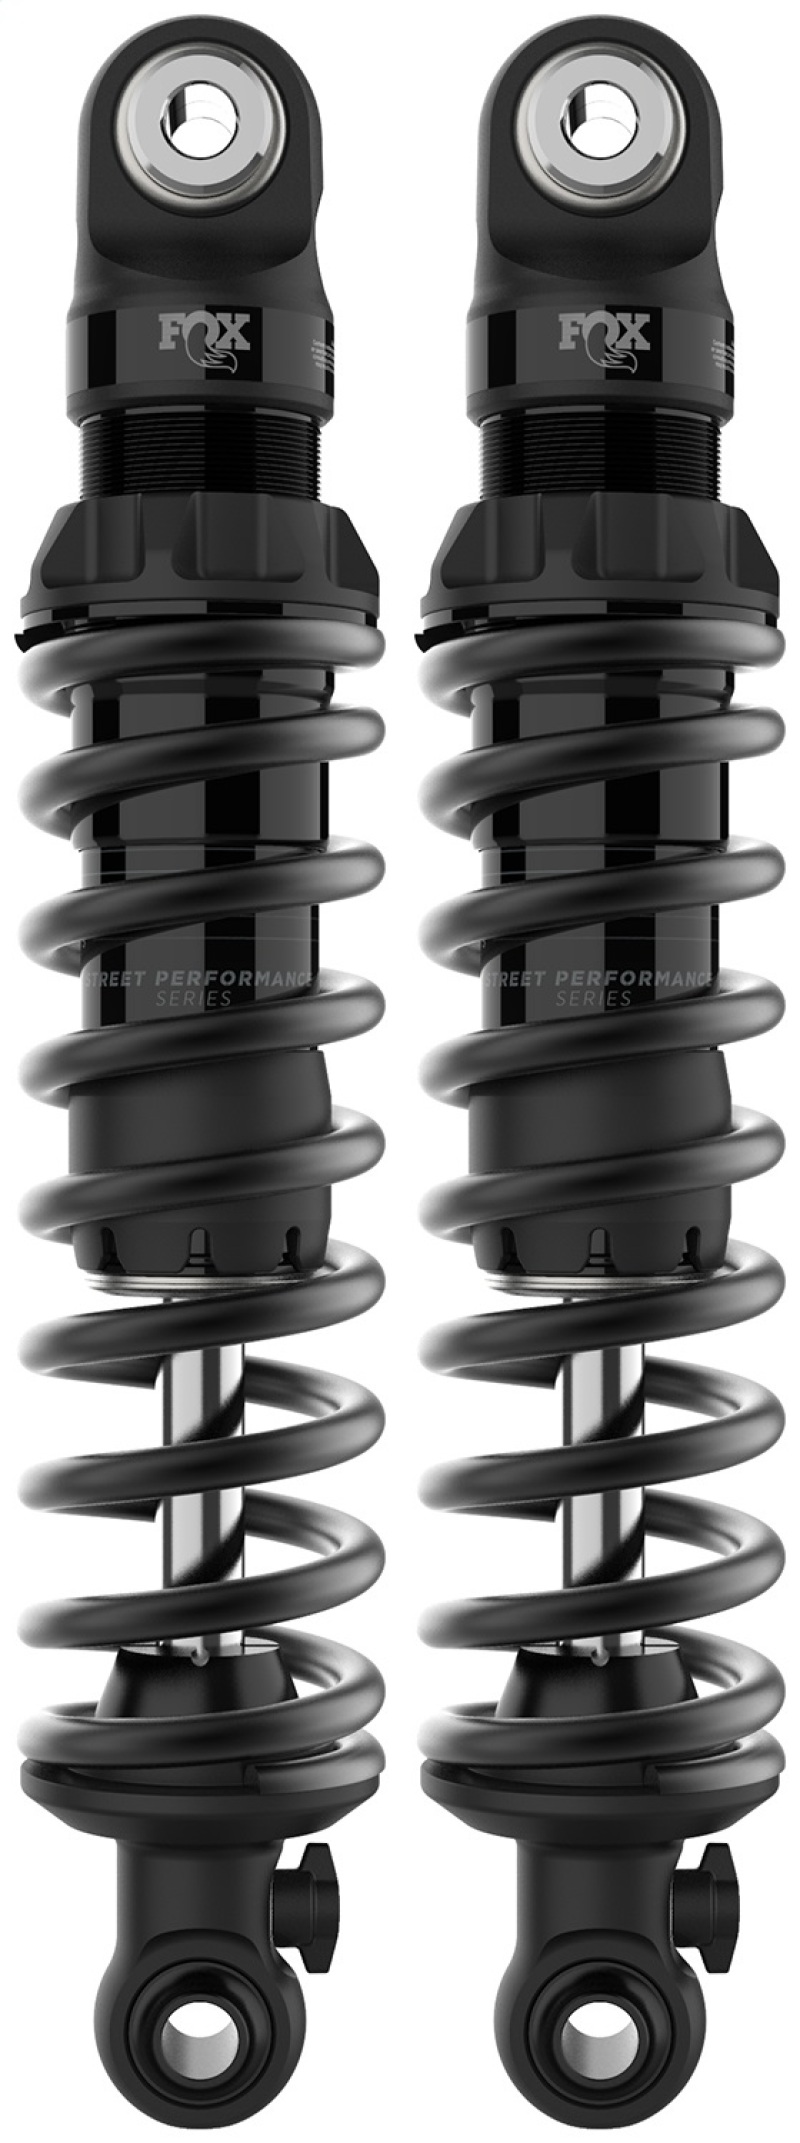 Fox Harley-Davidson AM Touring 13in (13.06 / 3.31) 1.459in IFP-QSR Super Heavy Spring - Set of 2 - 897-27-214